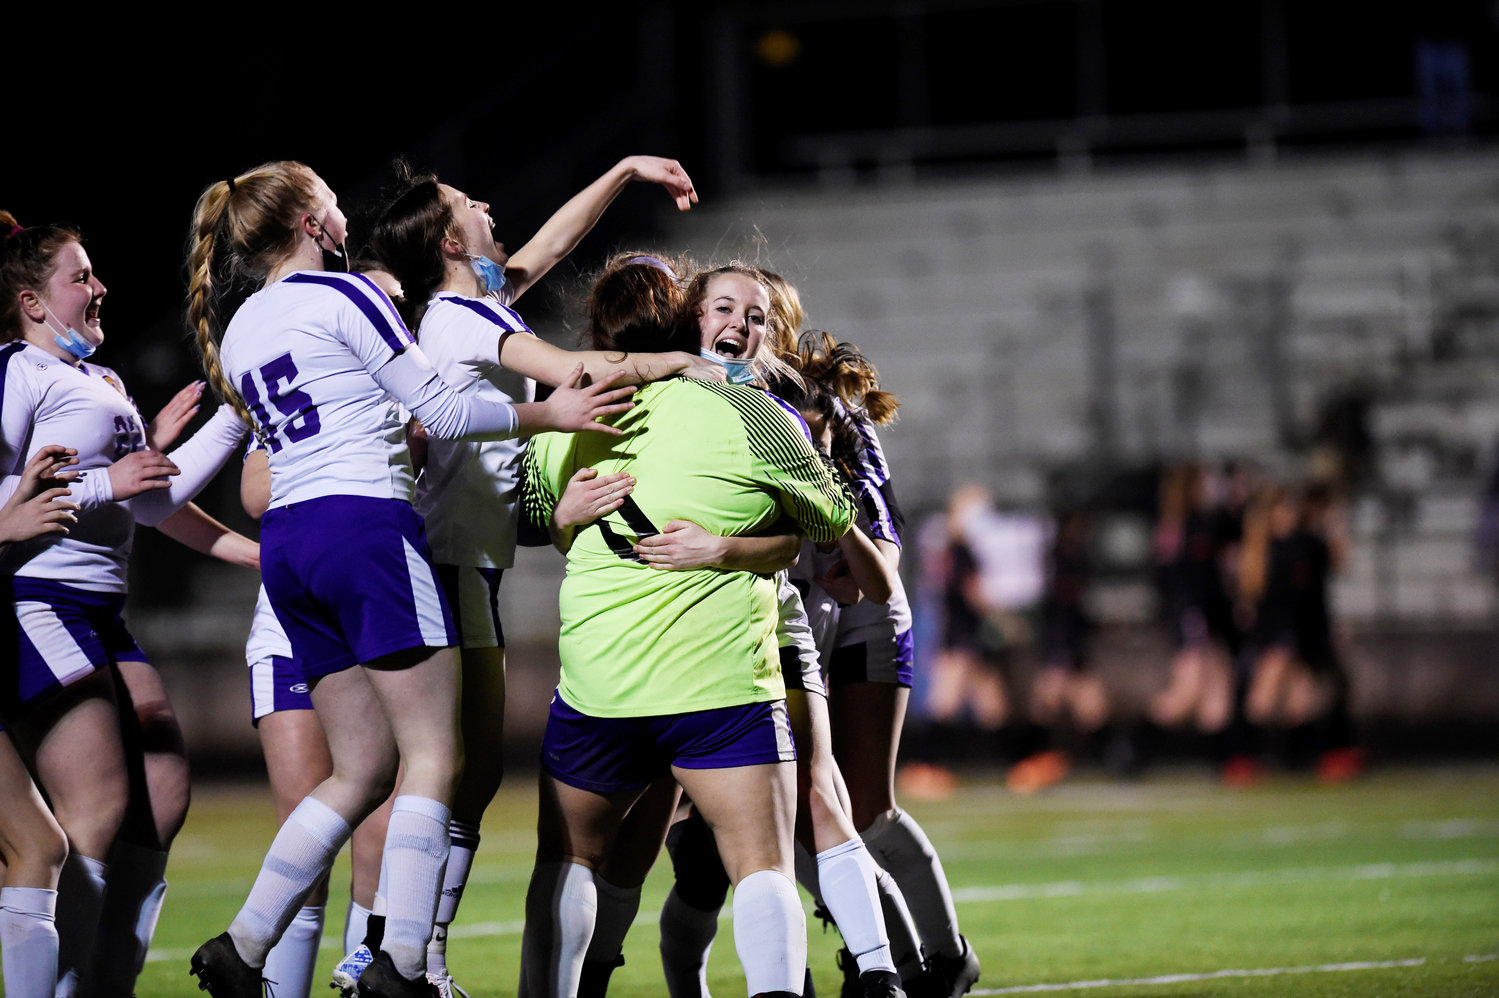 Onalaska celebrates after knocking off Kalama for the Central 2B League's South Division title on Wednesday at home.